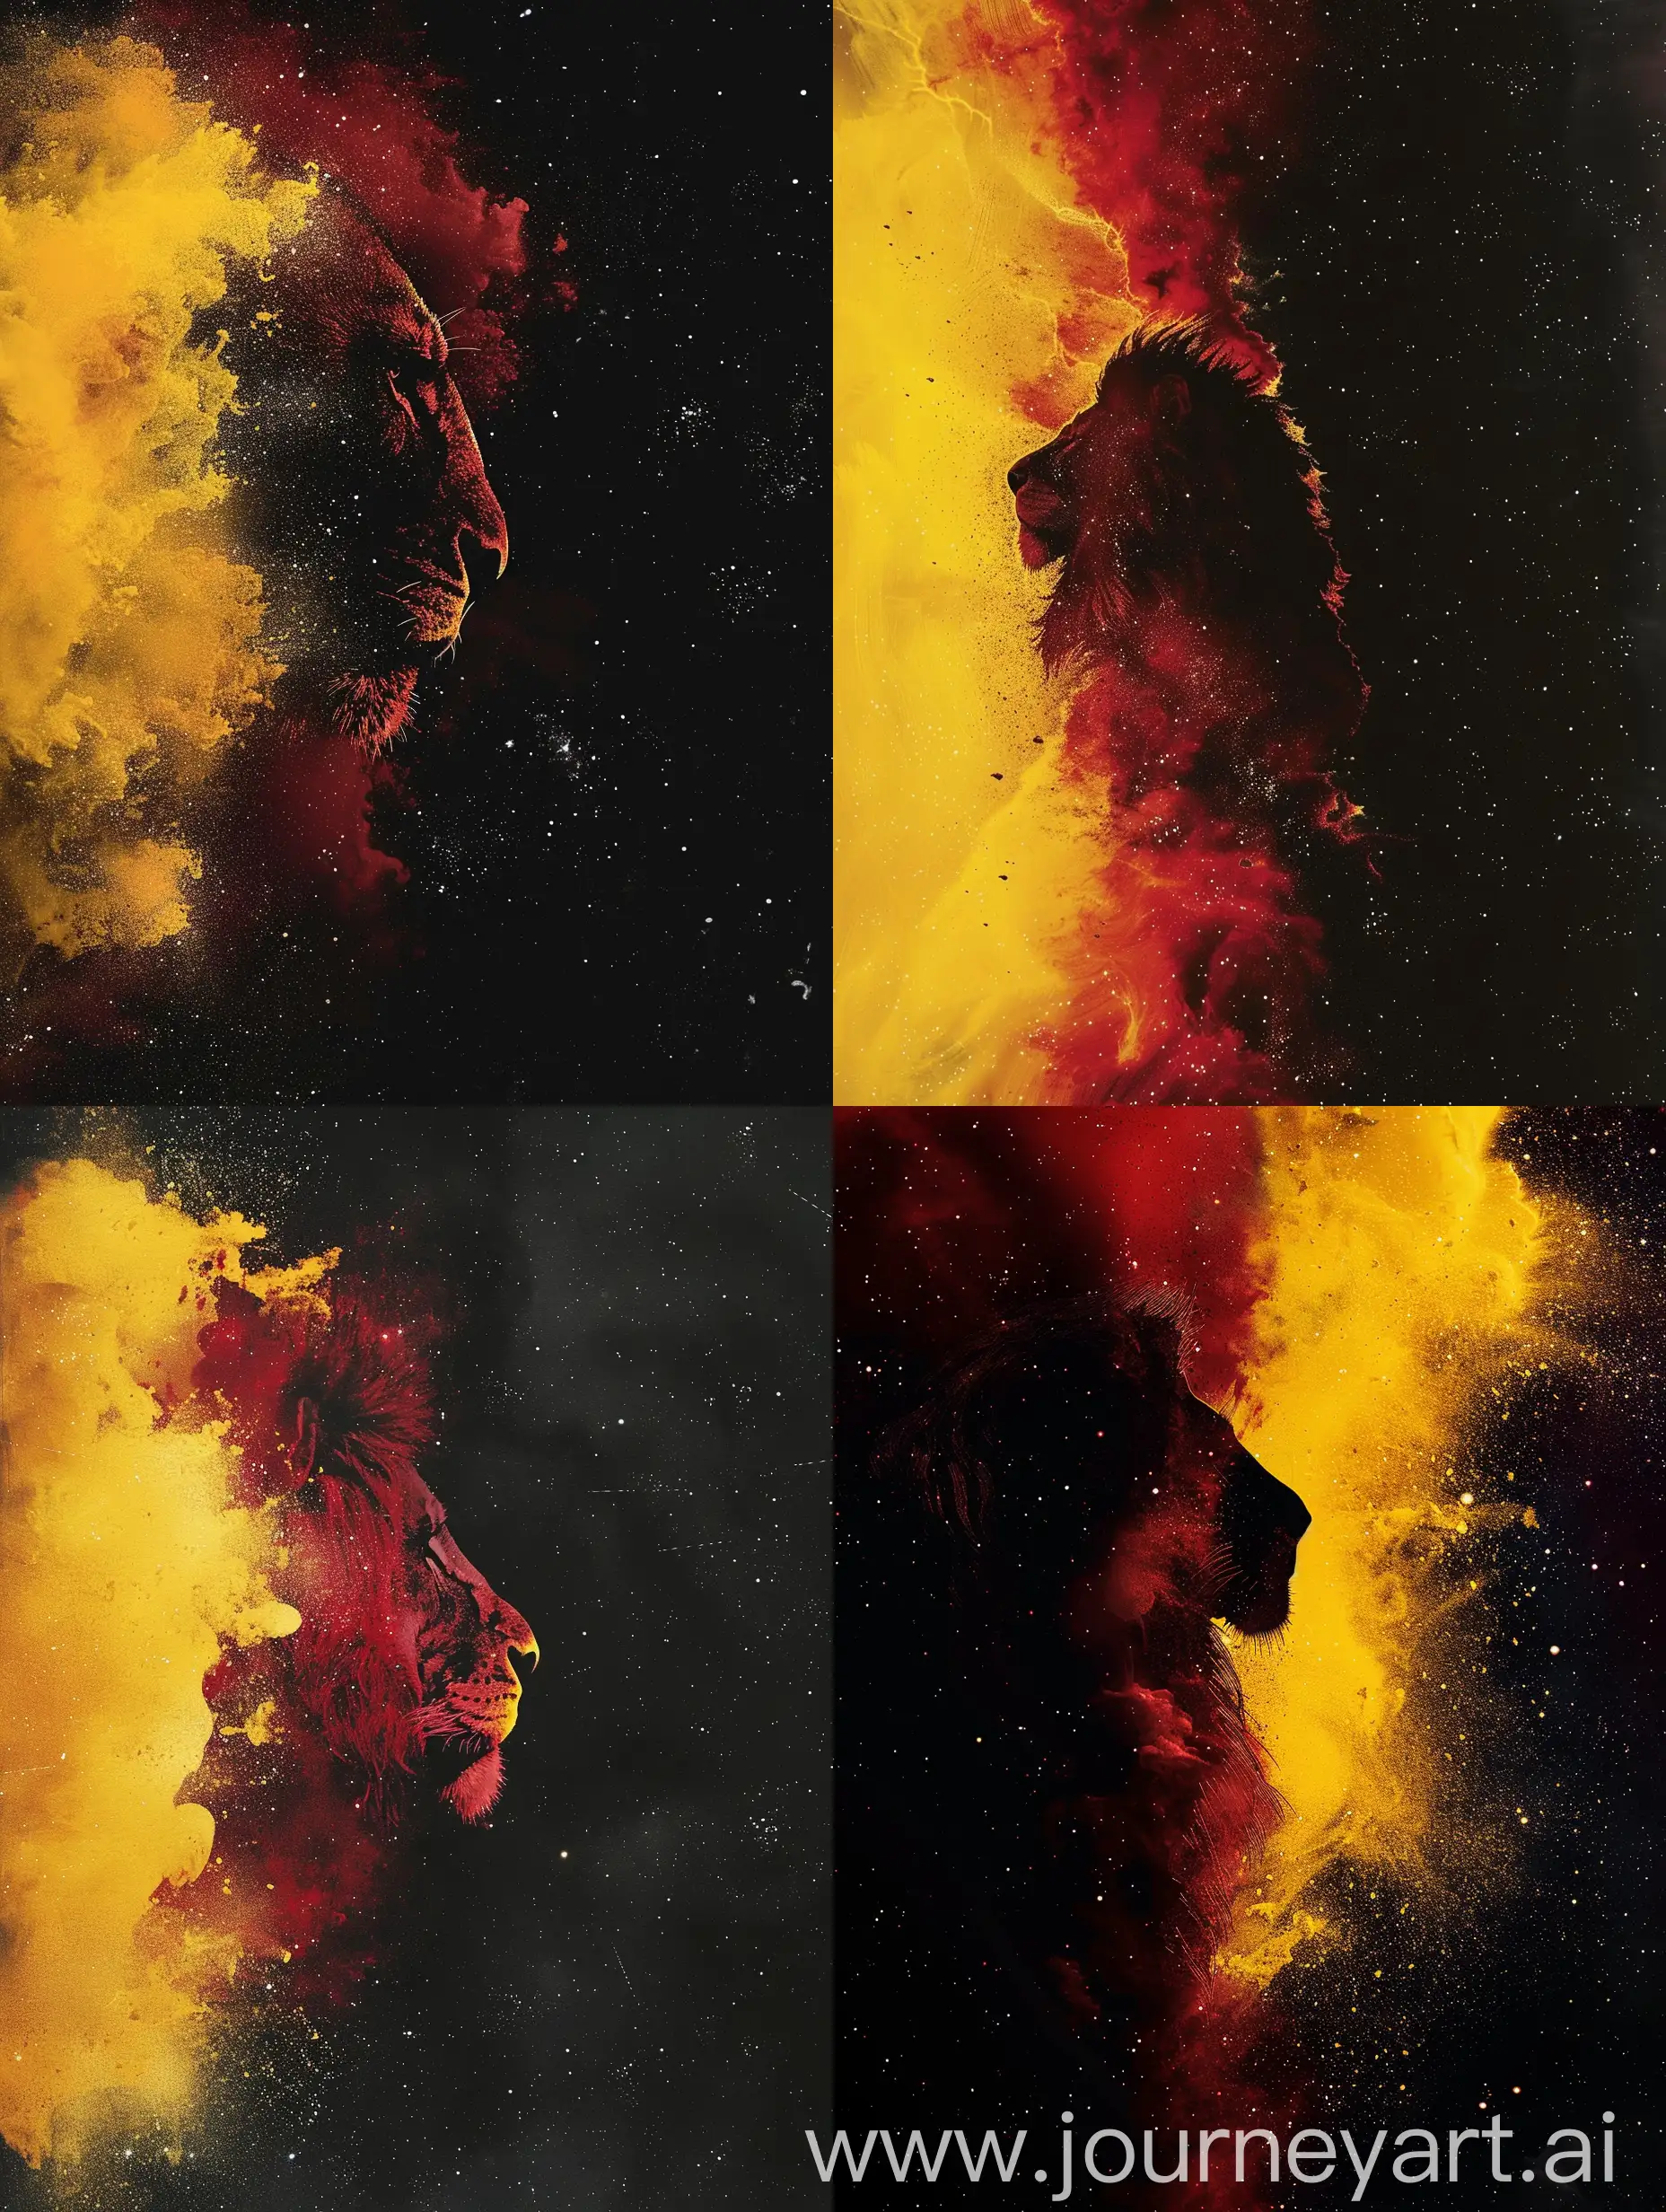 Lion-Silhouette-in-Yellow-Red-Space-with-Realistic-NASA-Dust-Clouds-and-Stars